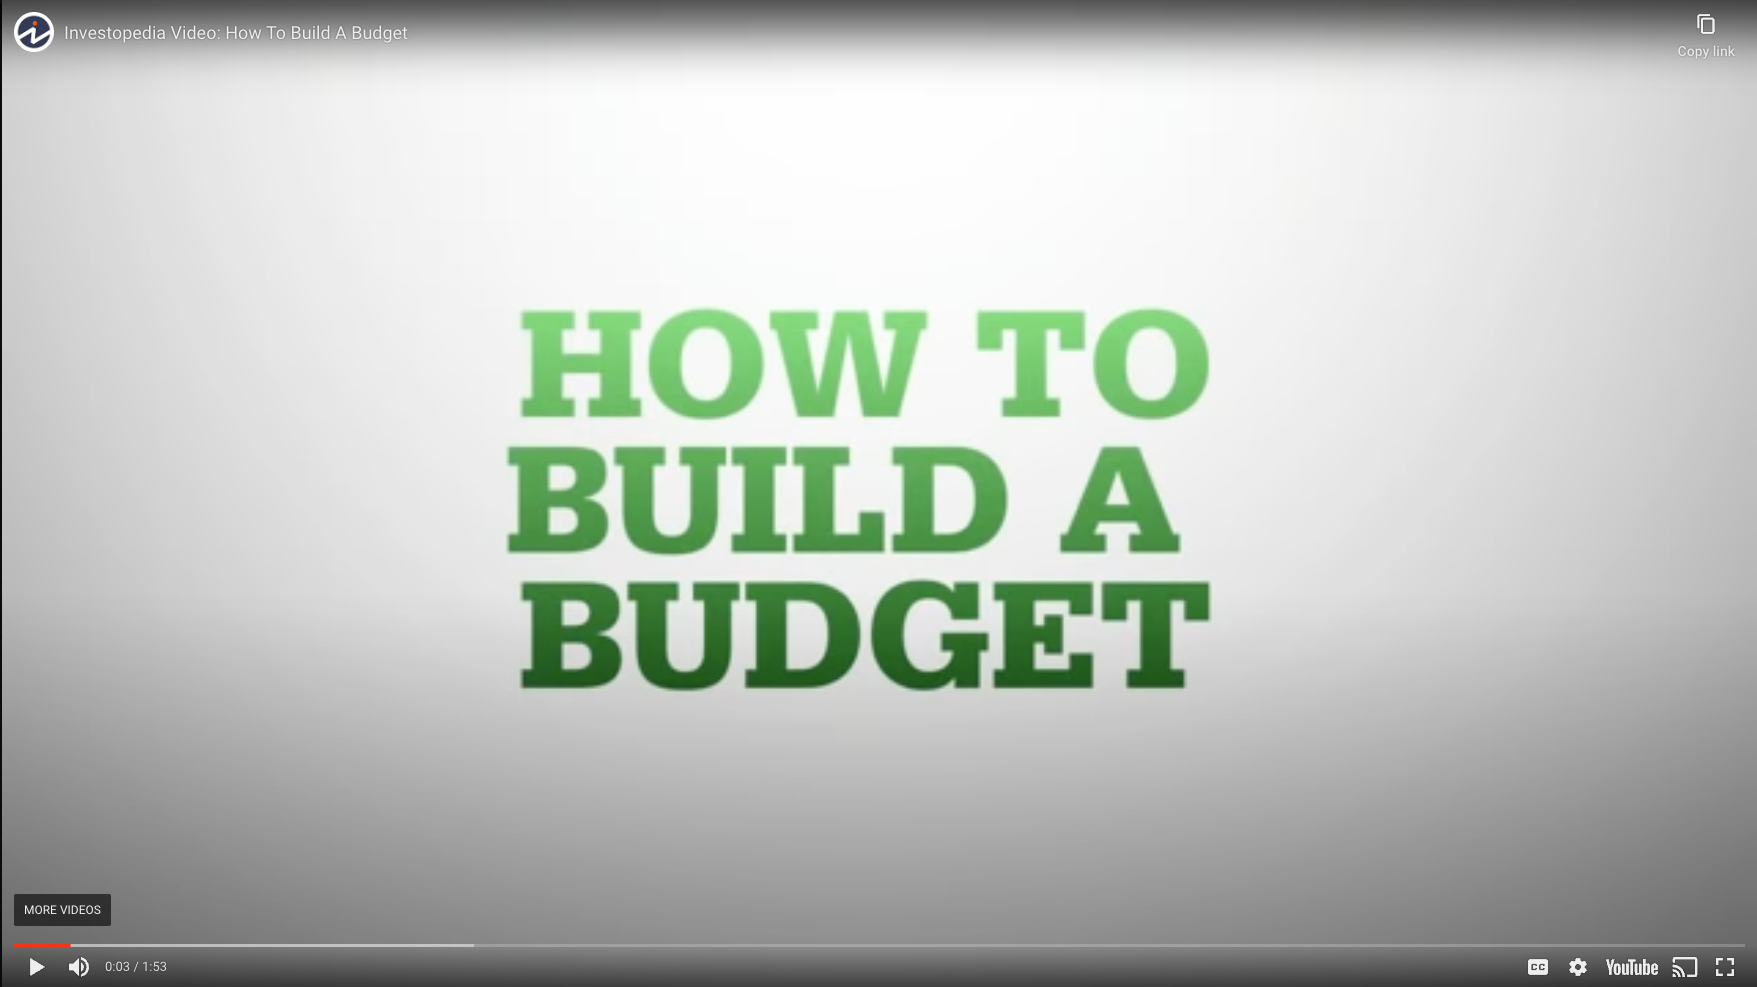 How to Build a Budget Video Thumbnail